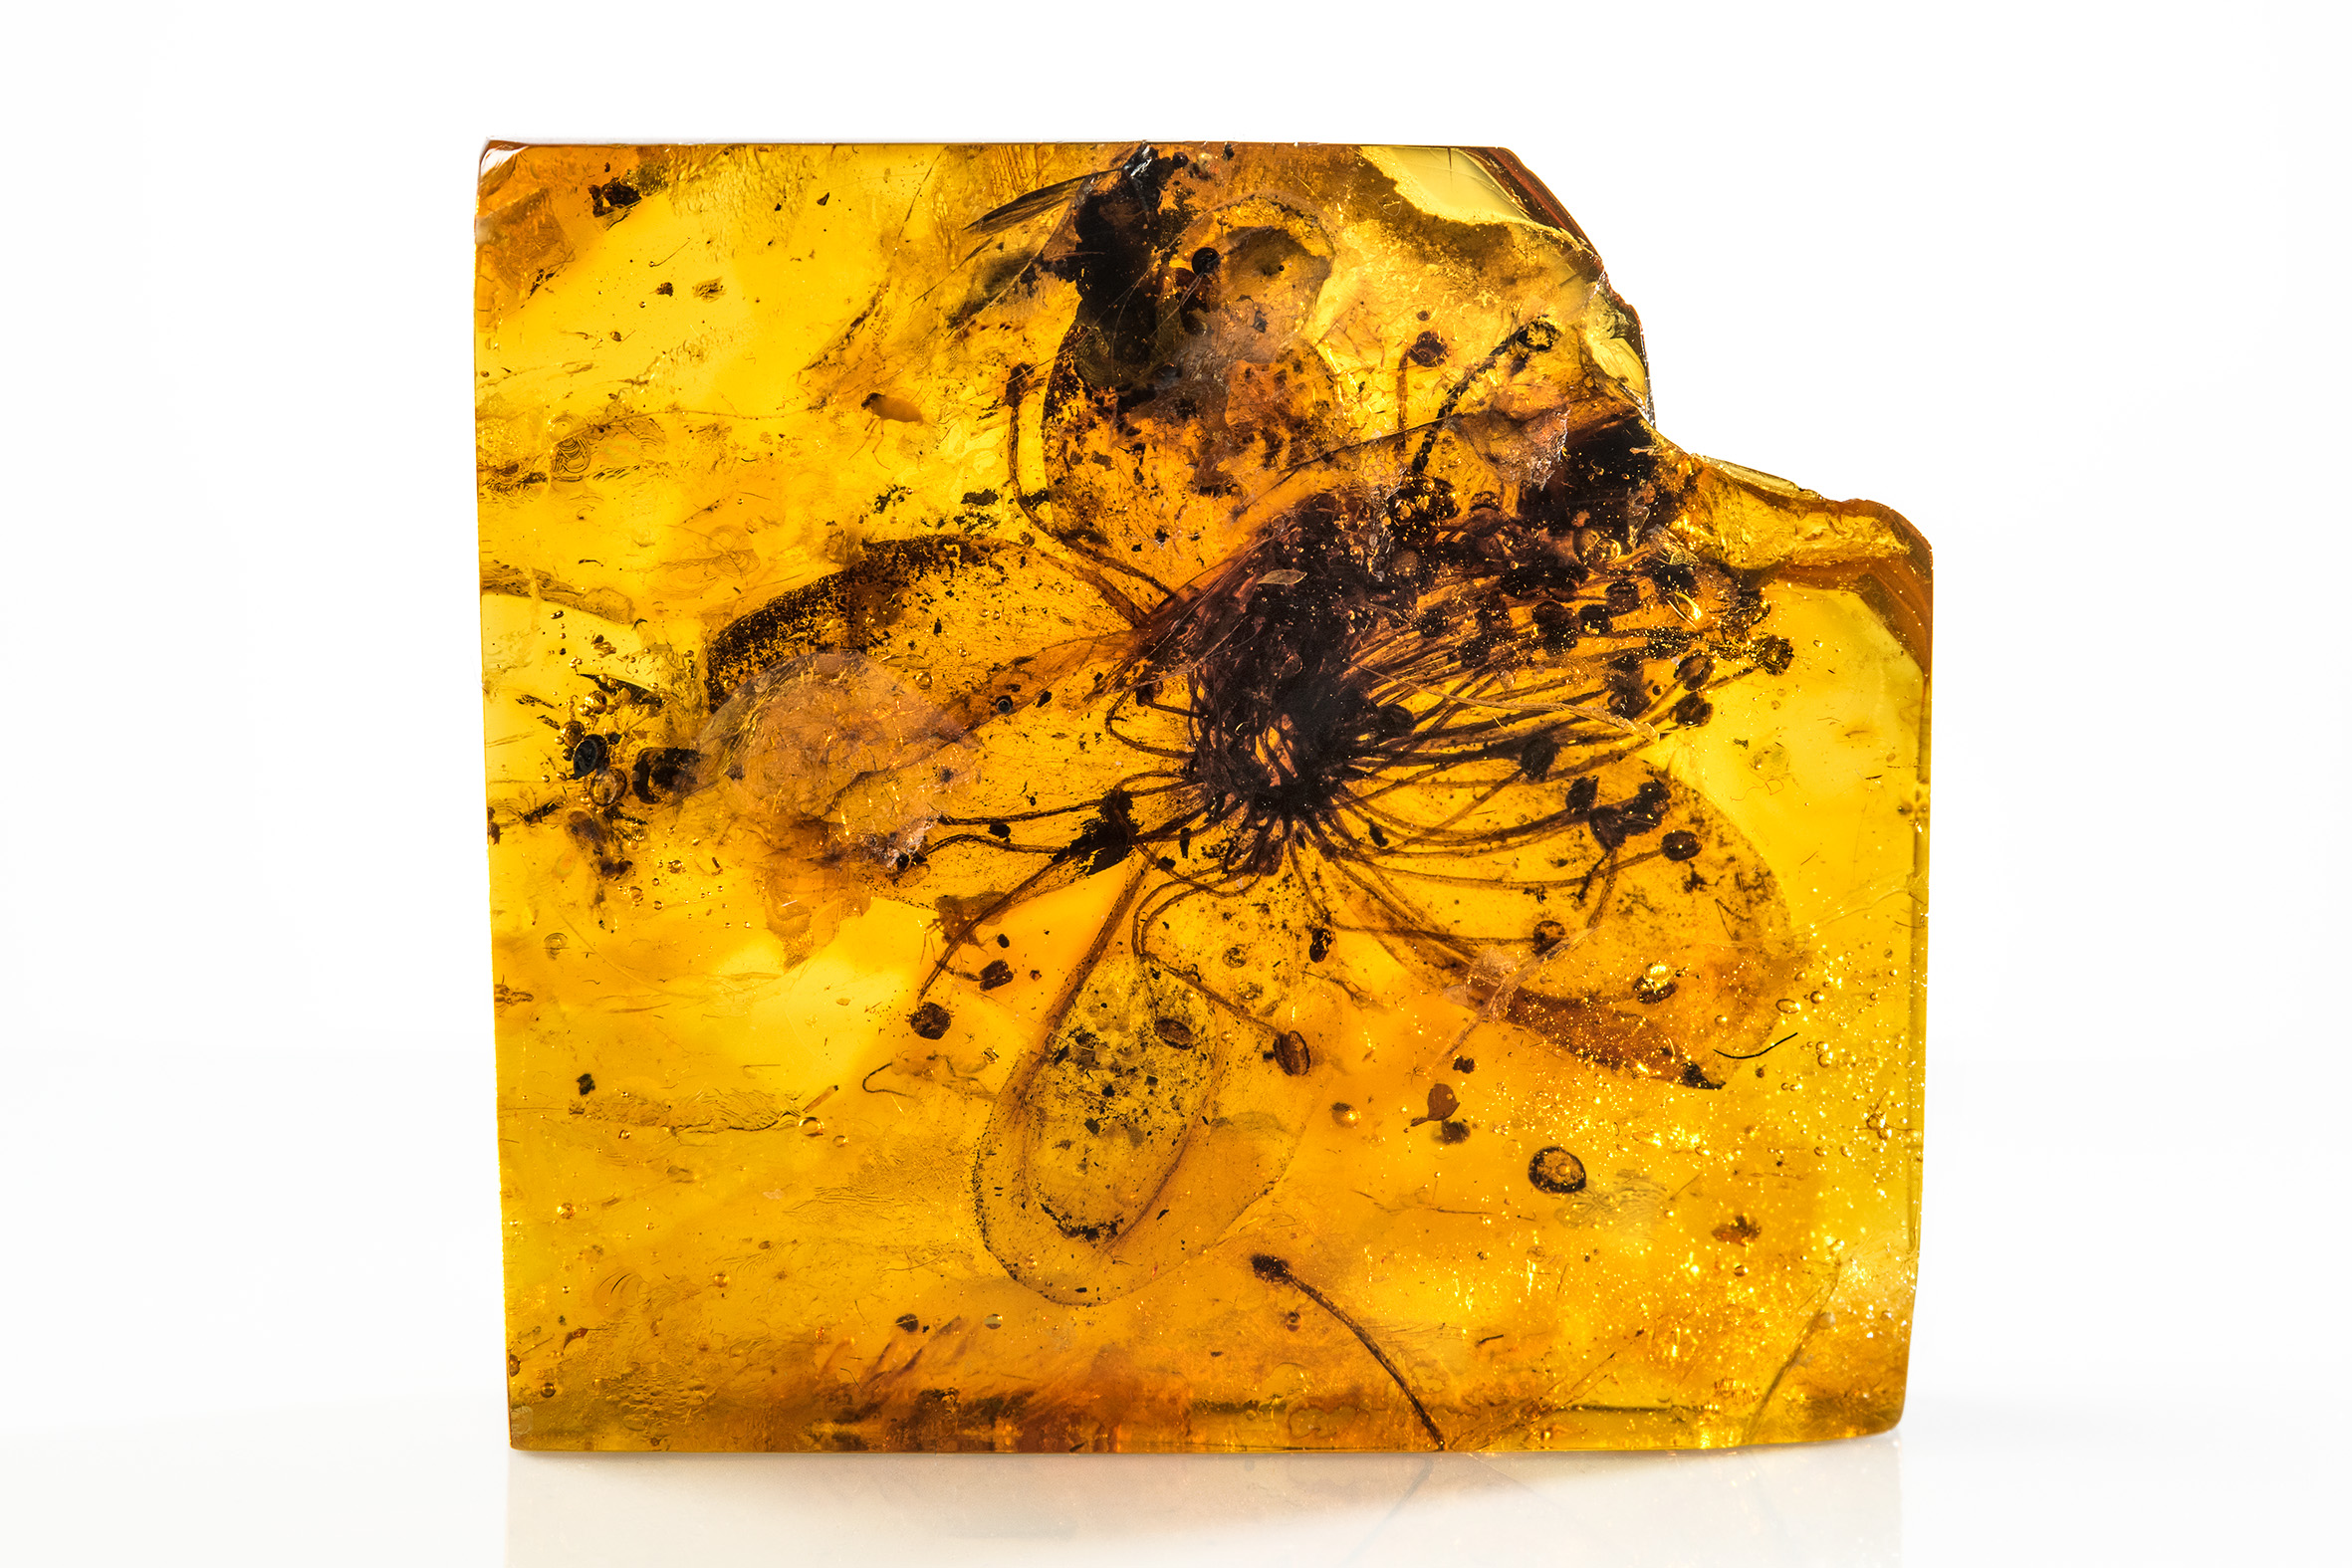 A new study showed the largest flower trapped in amber (EFE)